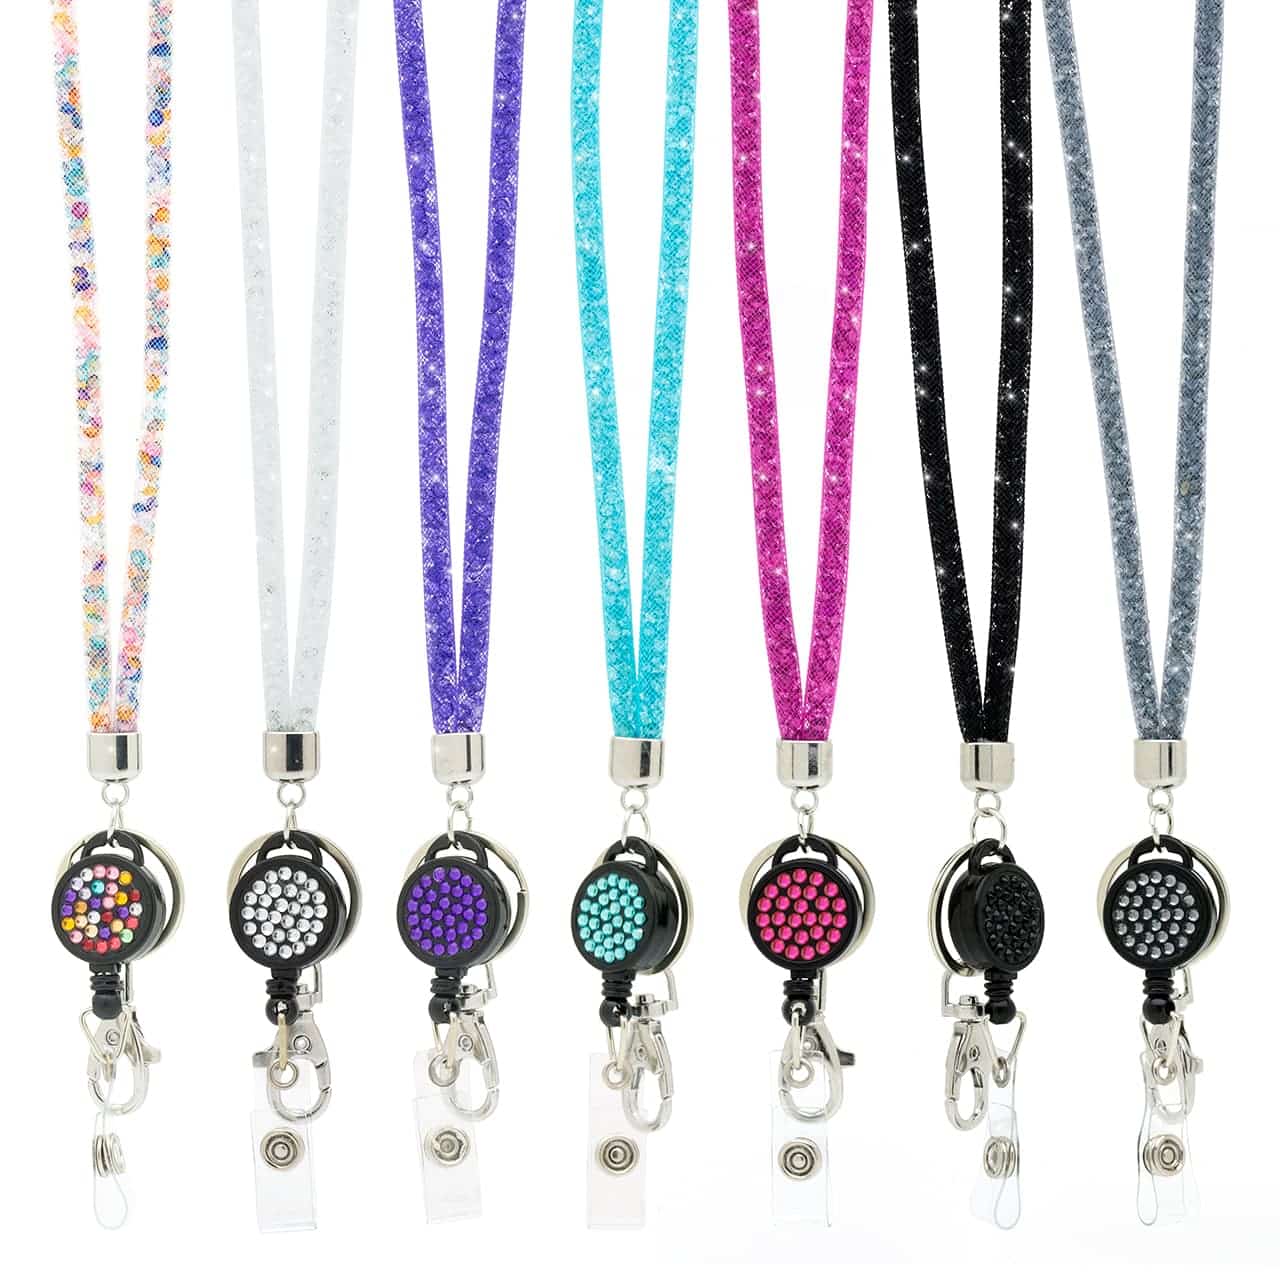 Sparkly Lanyard with a Split Ring, Metal Clip & Retractable Reel Holder